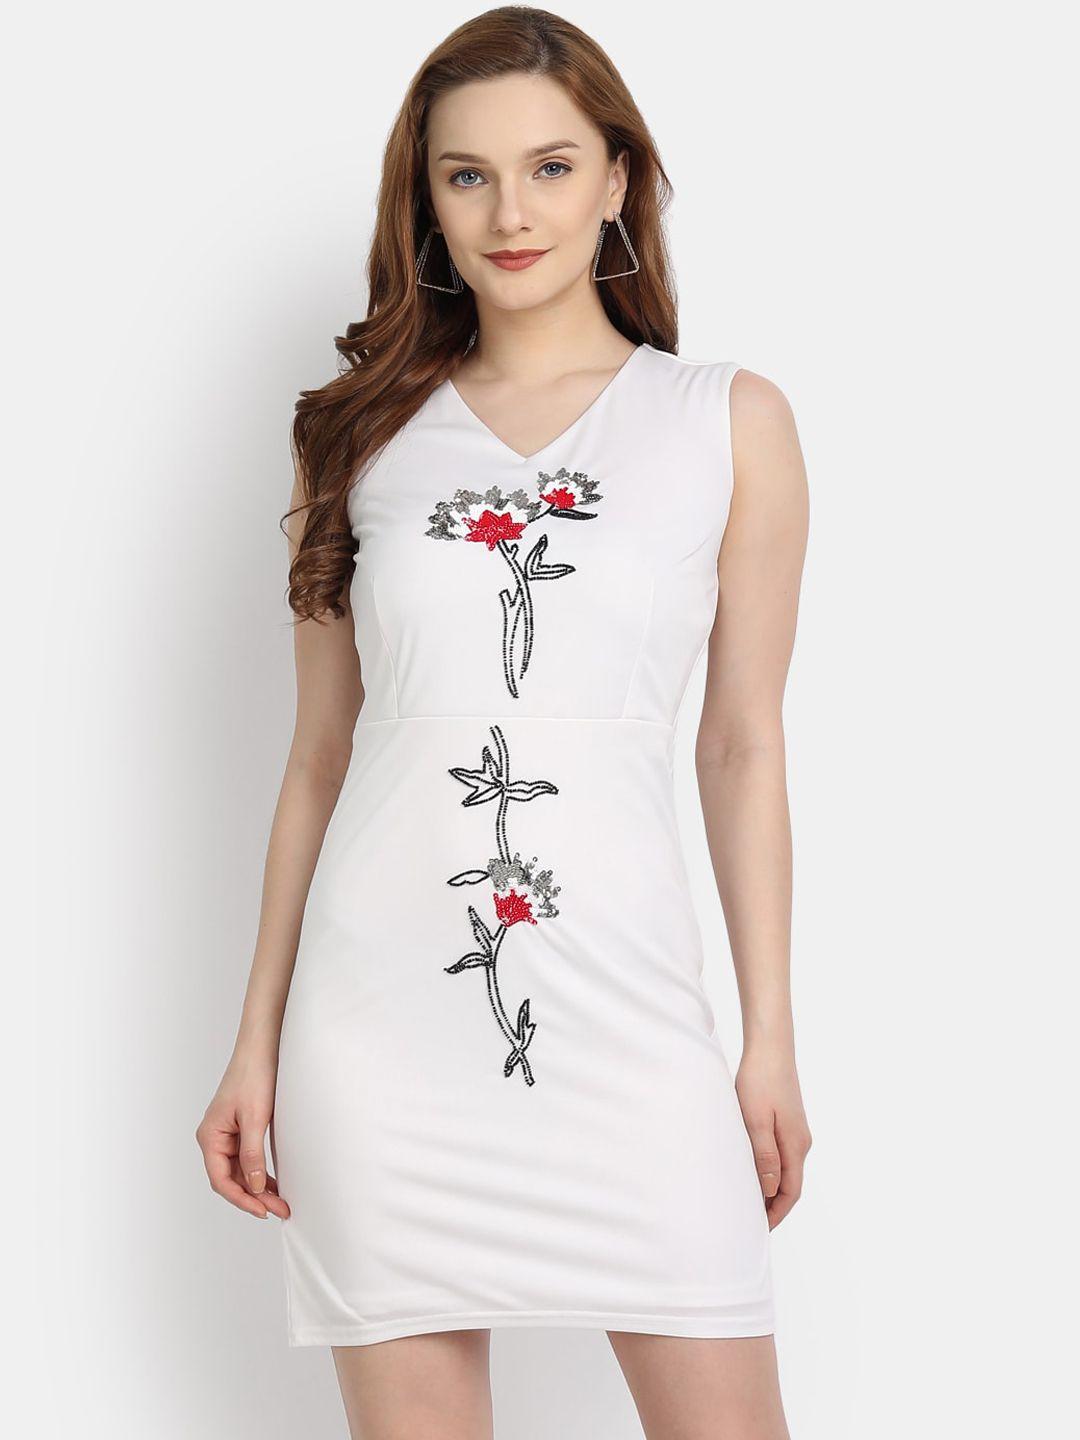 ly2 women white & red floral embroidered scuba bodycon dress